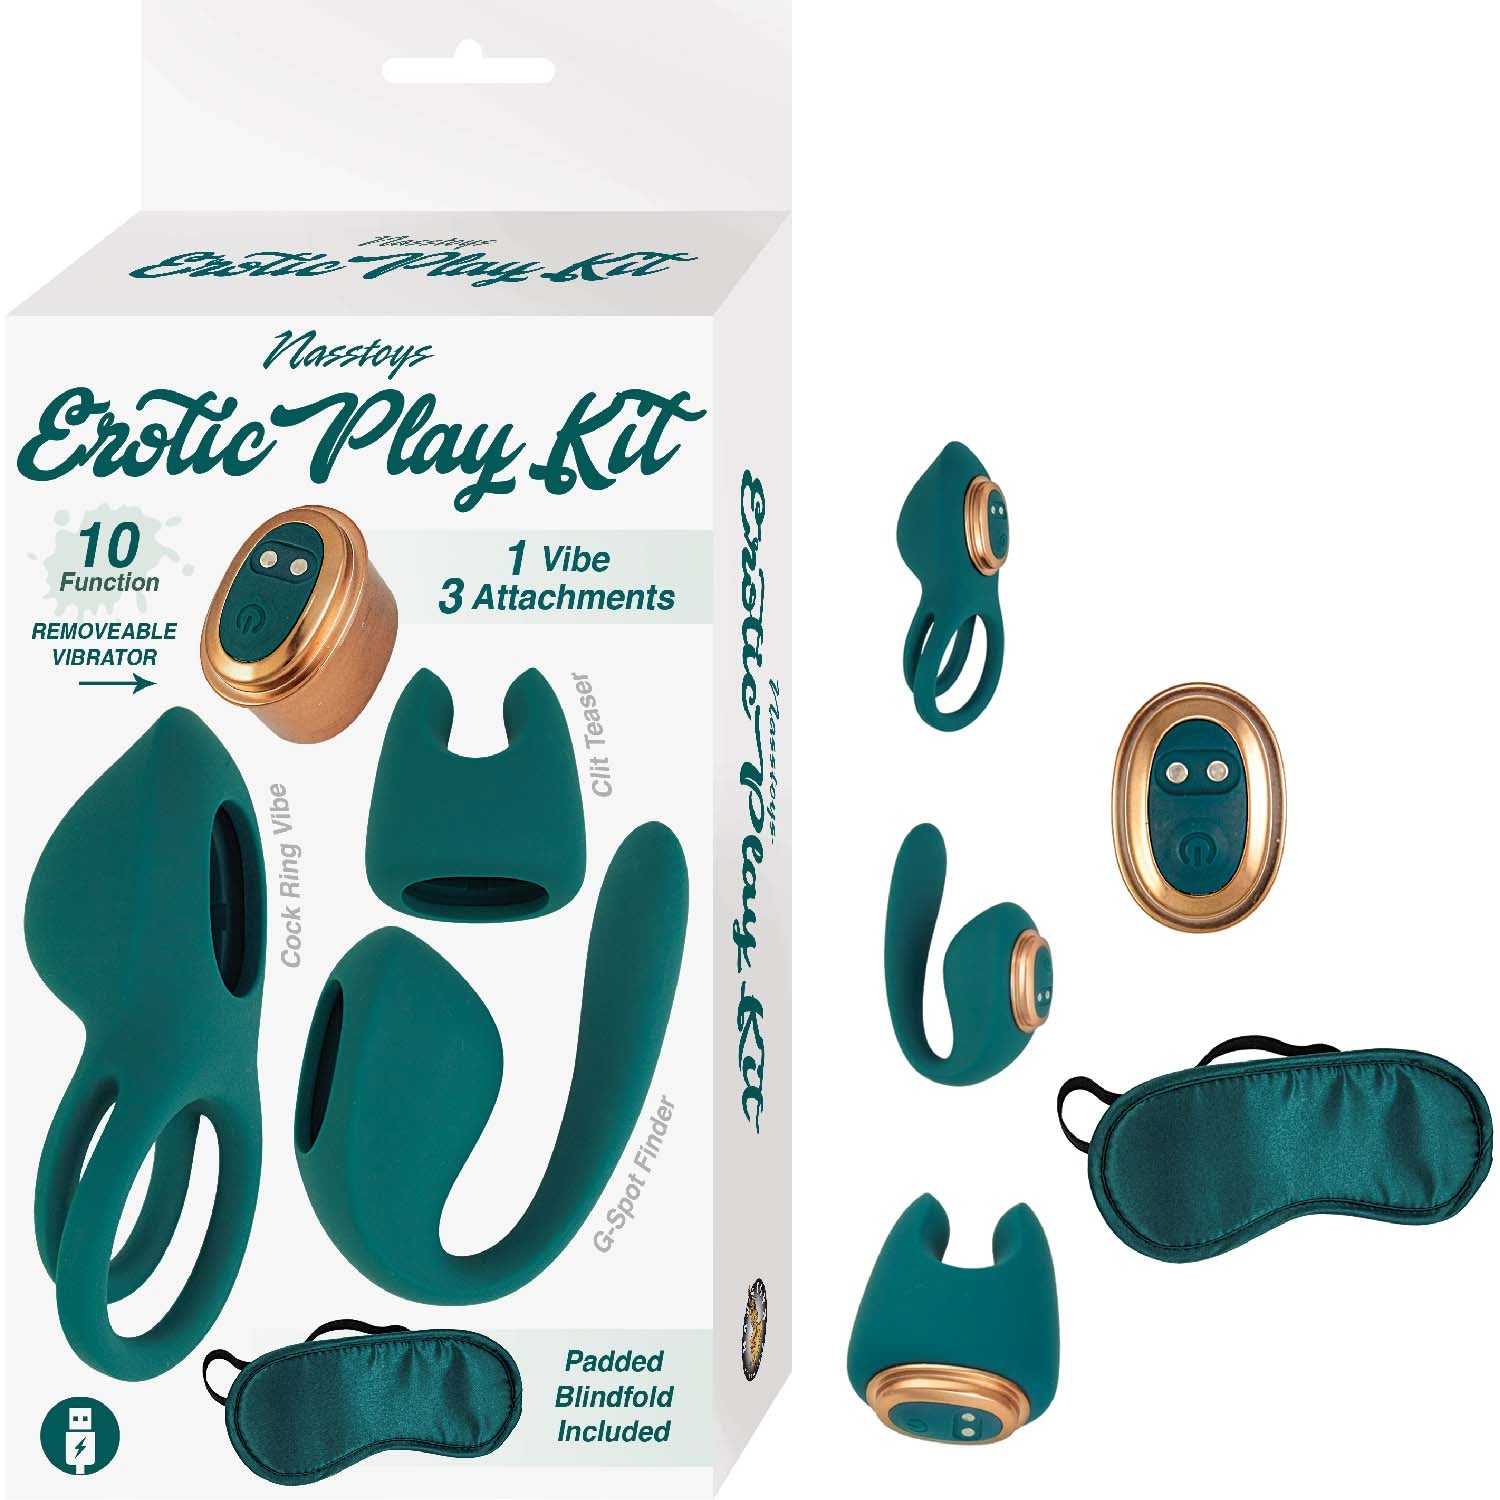 Exotic Play Kit - Green | CheapLubes.com